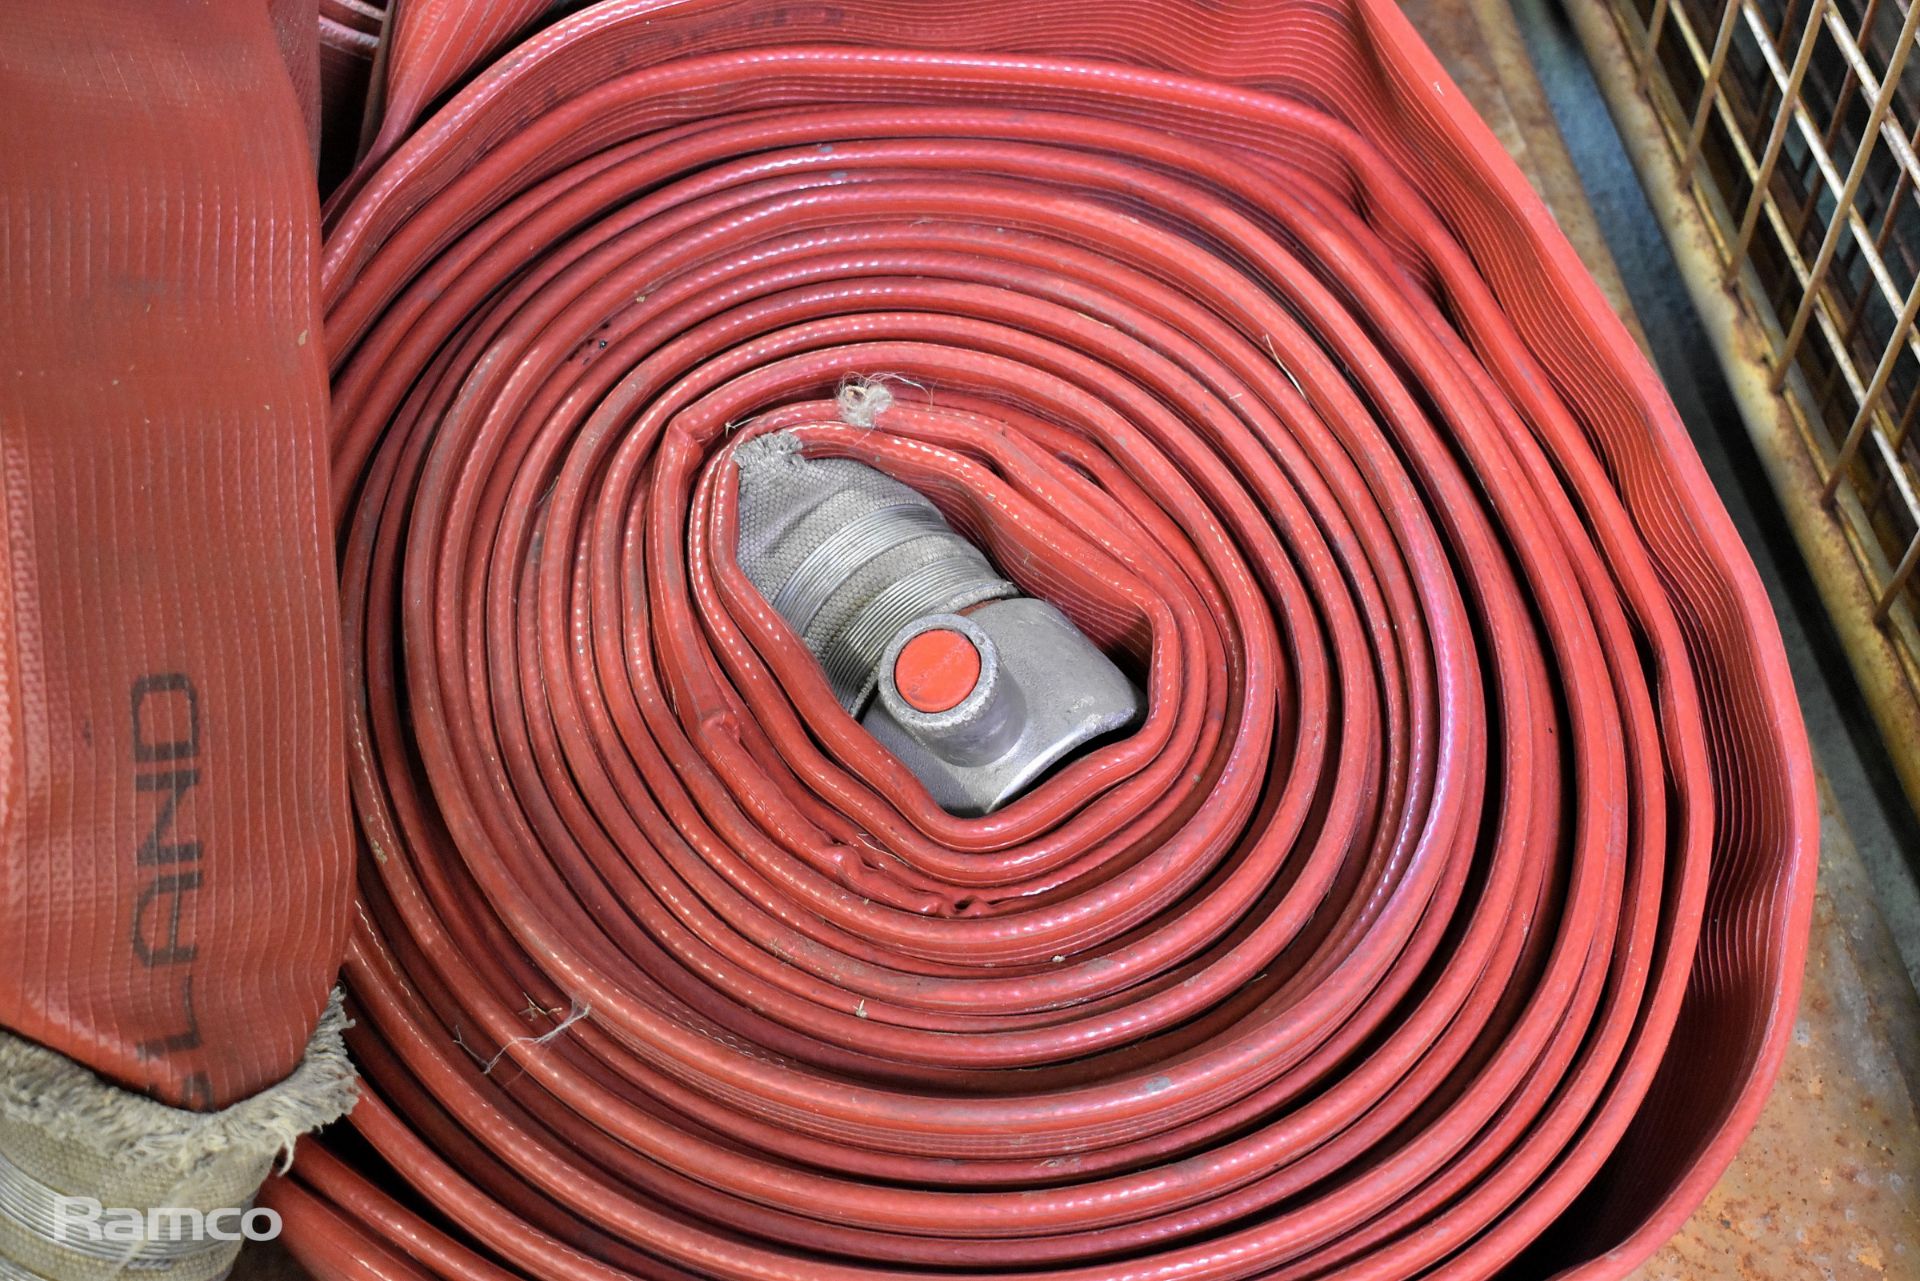 5x Angus Duraline BS 6391 2009 Type 3 31015 Layflat Fire Hoses - approx. 22.5m long, 70mm diameter - Image 3 of 3